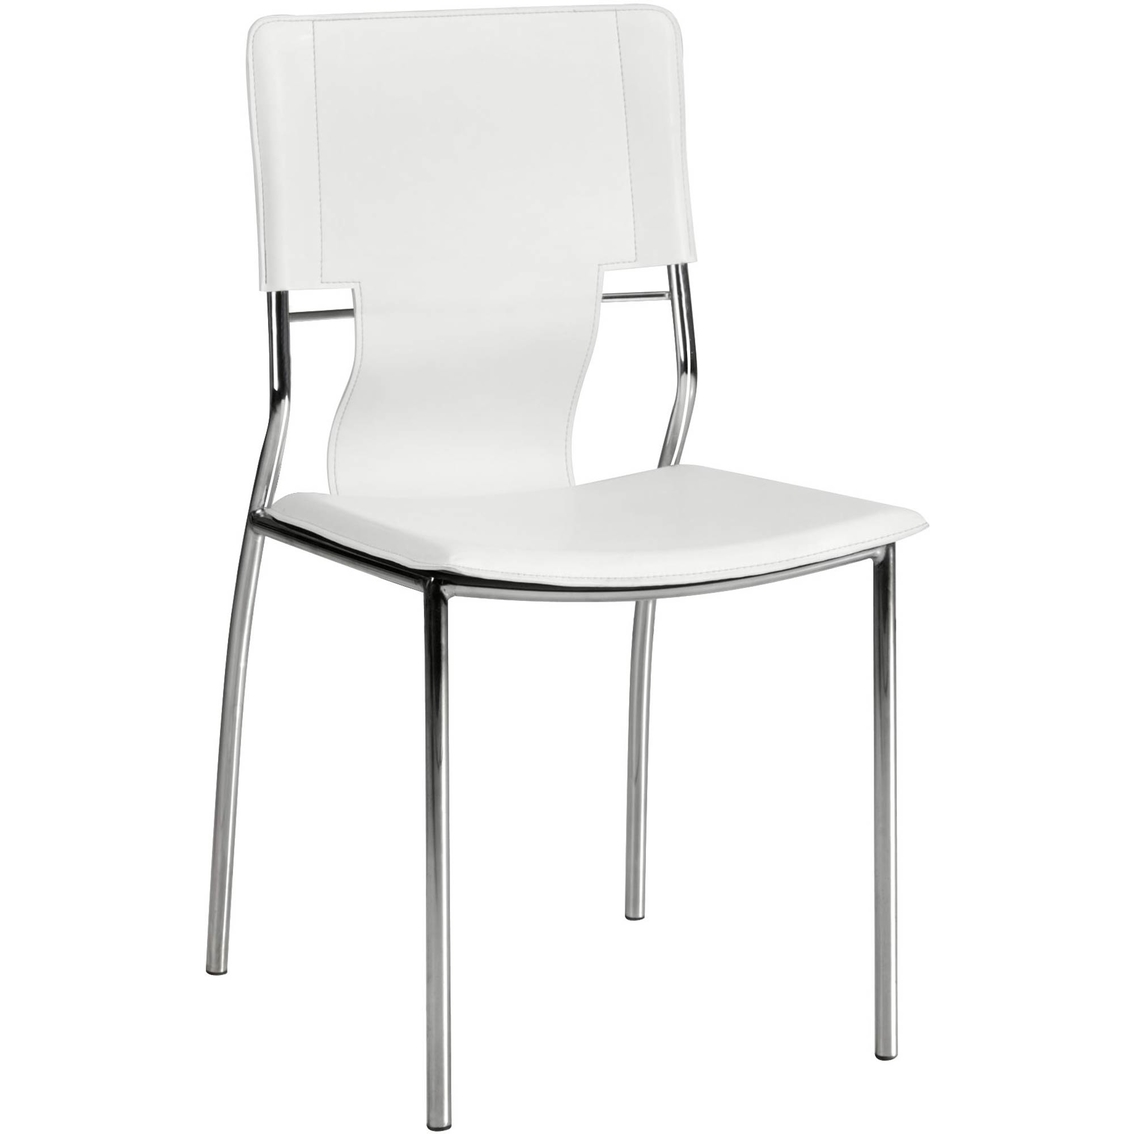 Zuo Trafico Dining Chair 4 Pk - Image 3 of 4